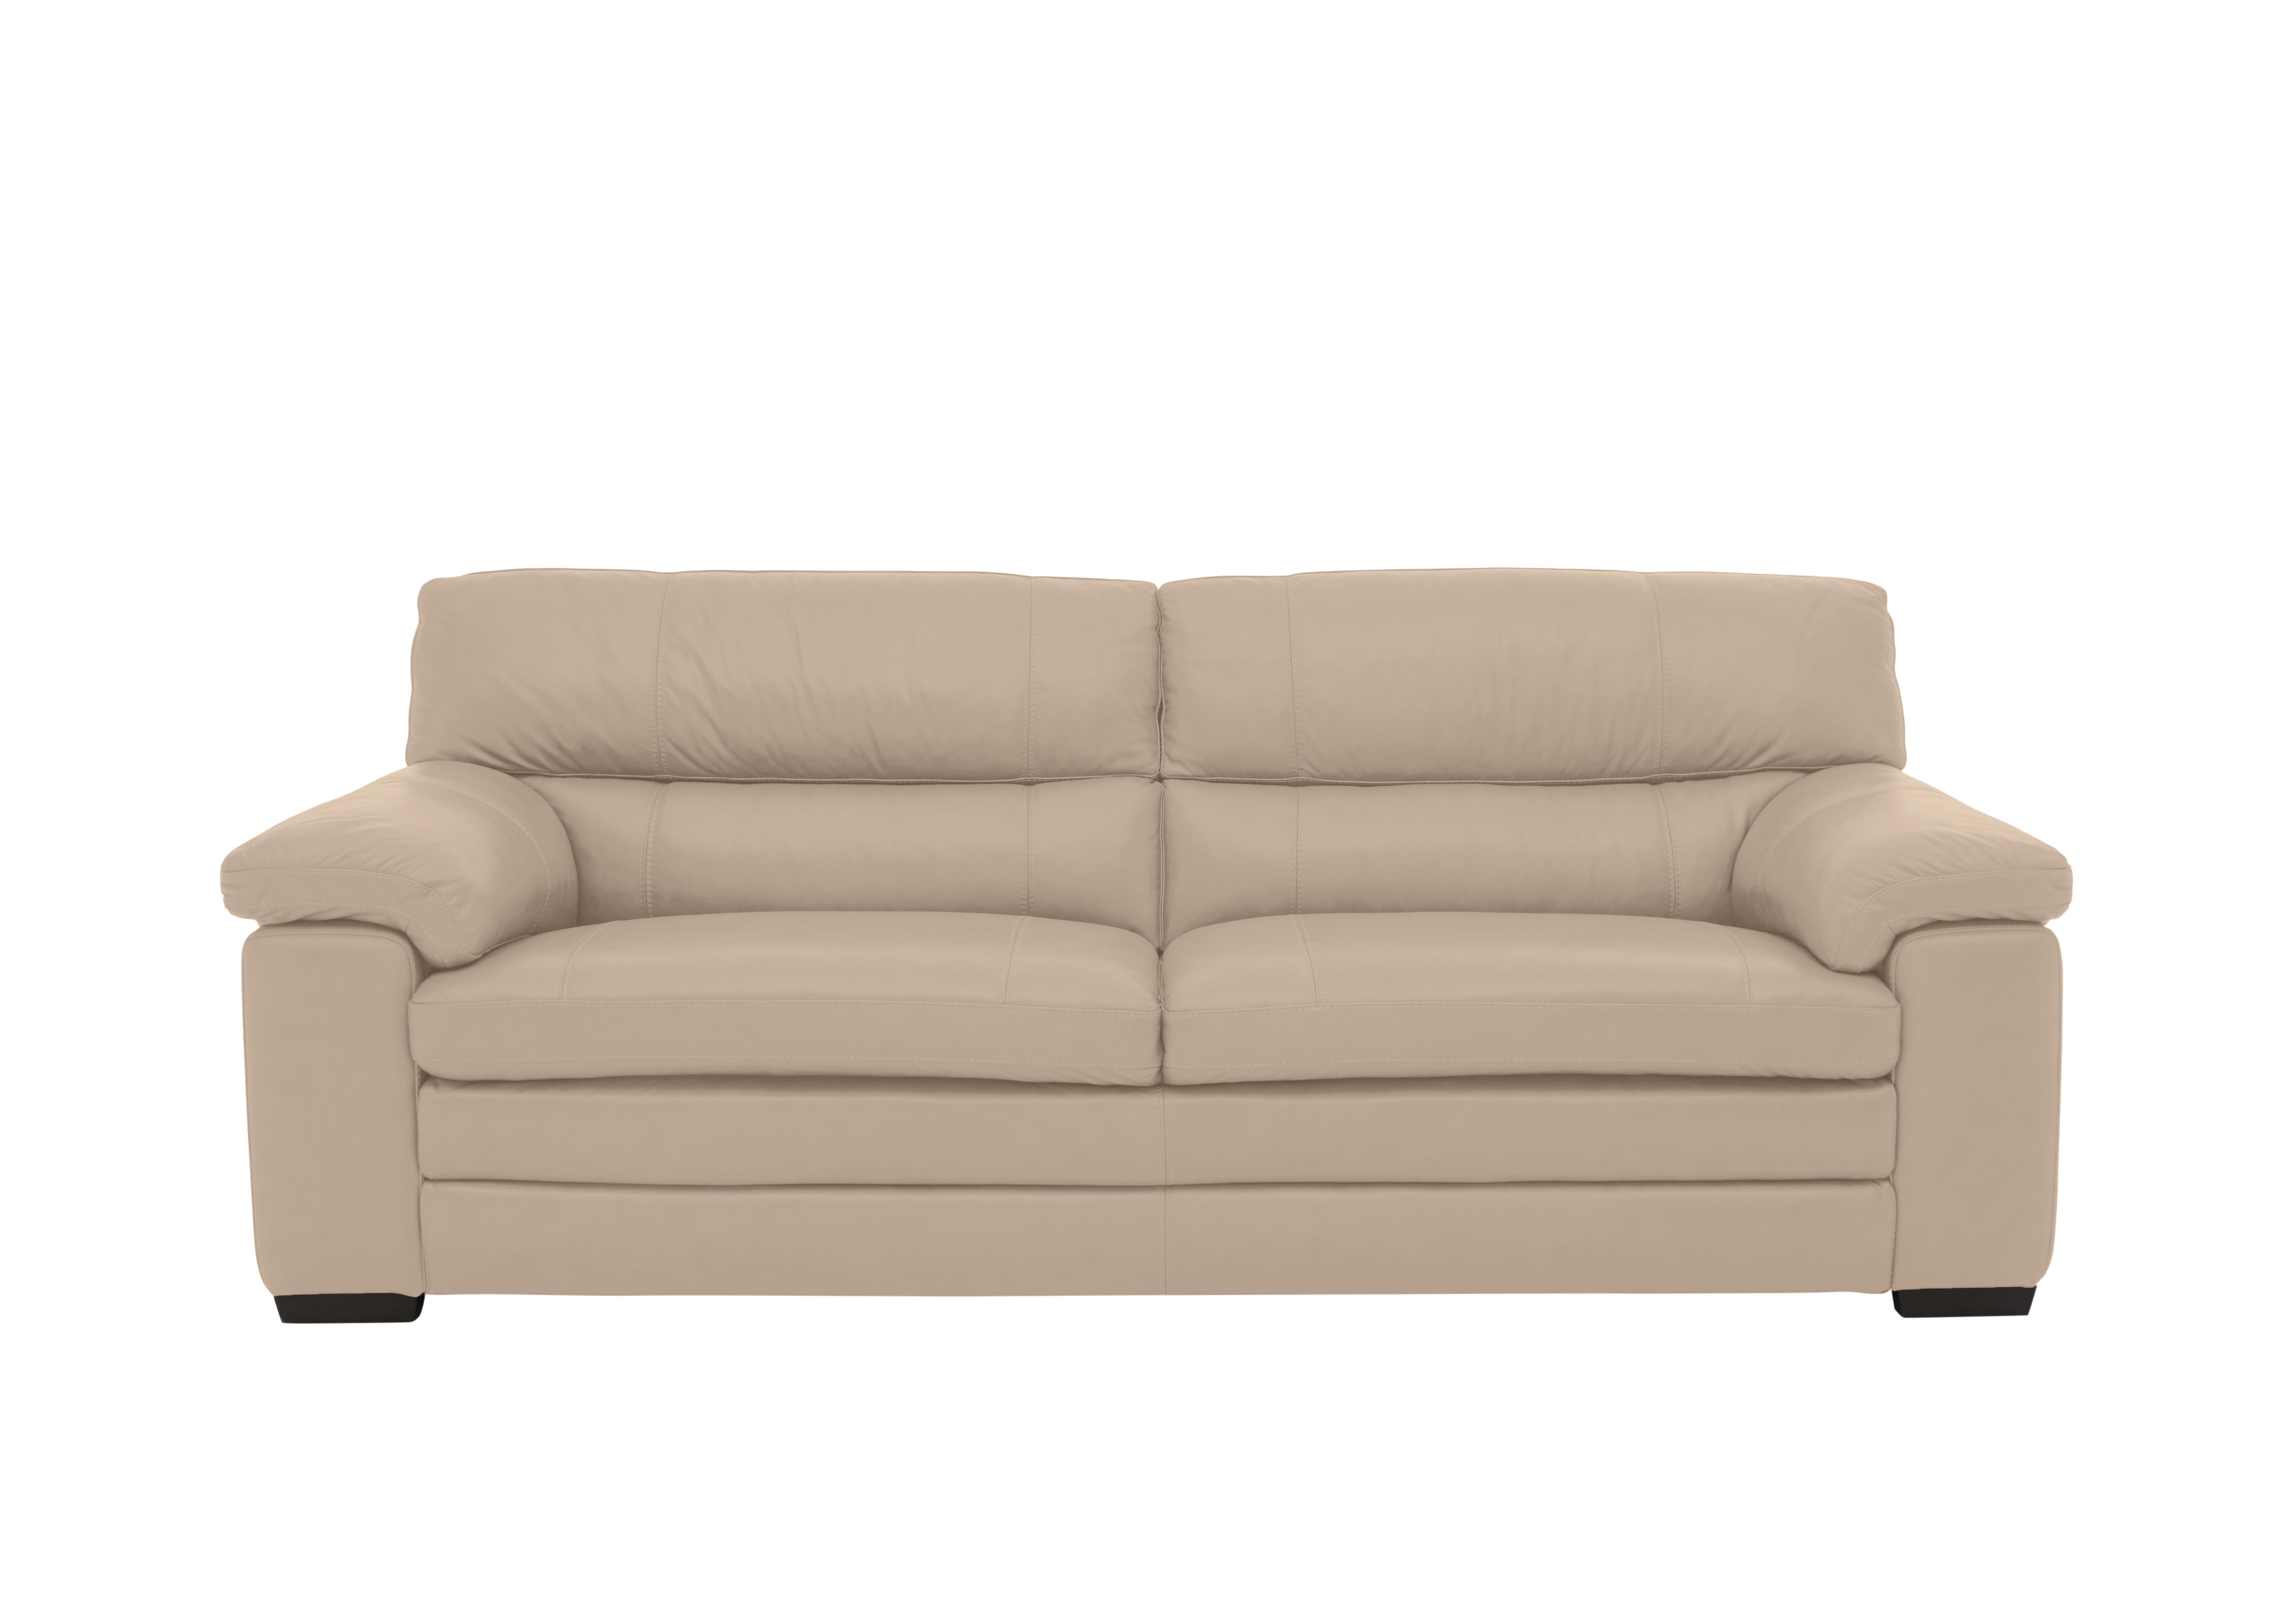 Cozee 3 Seater Pure Premium Leather Sofa in Bv-039c Pebble on Furniture Village